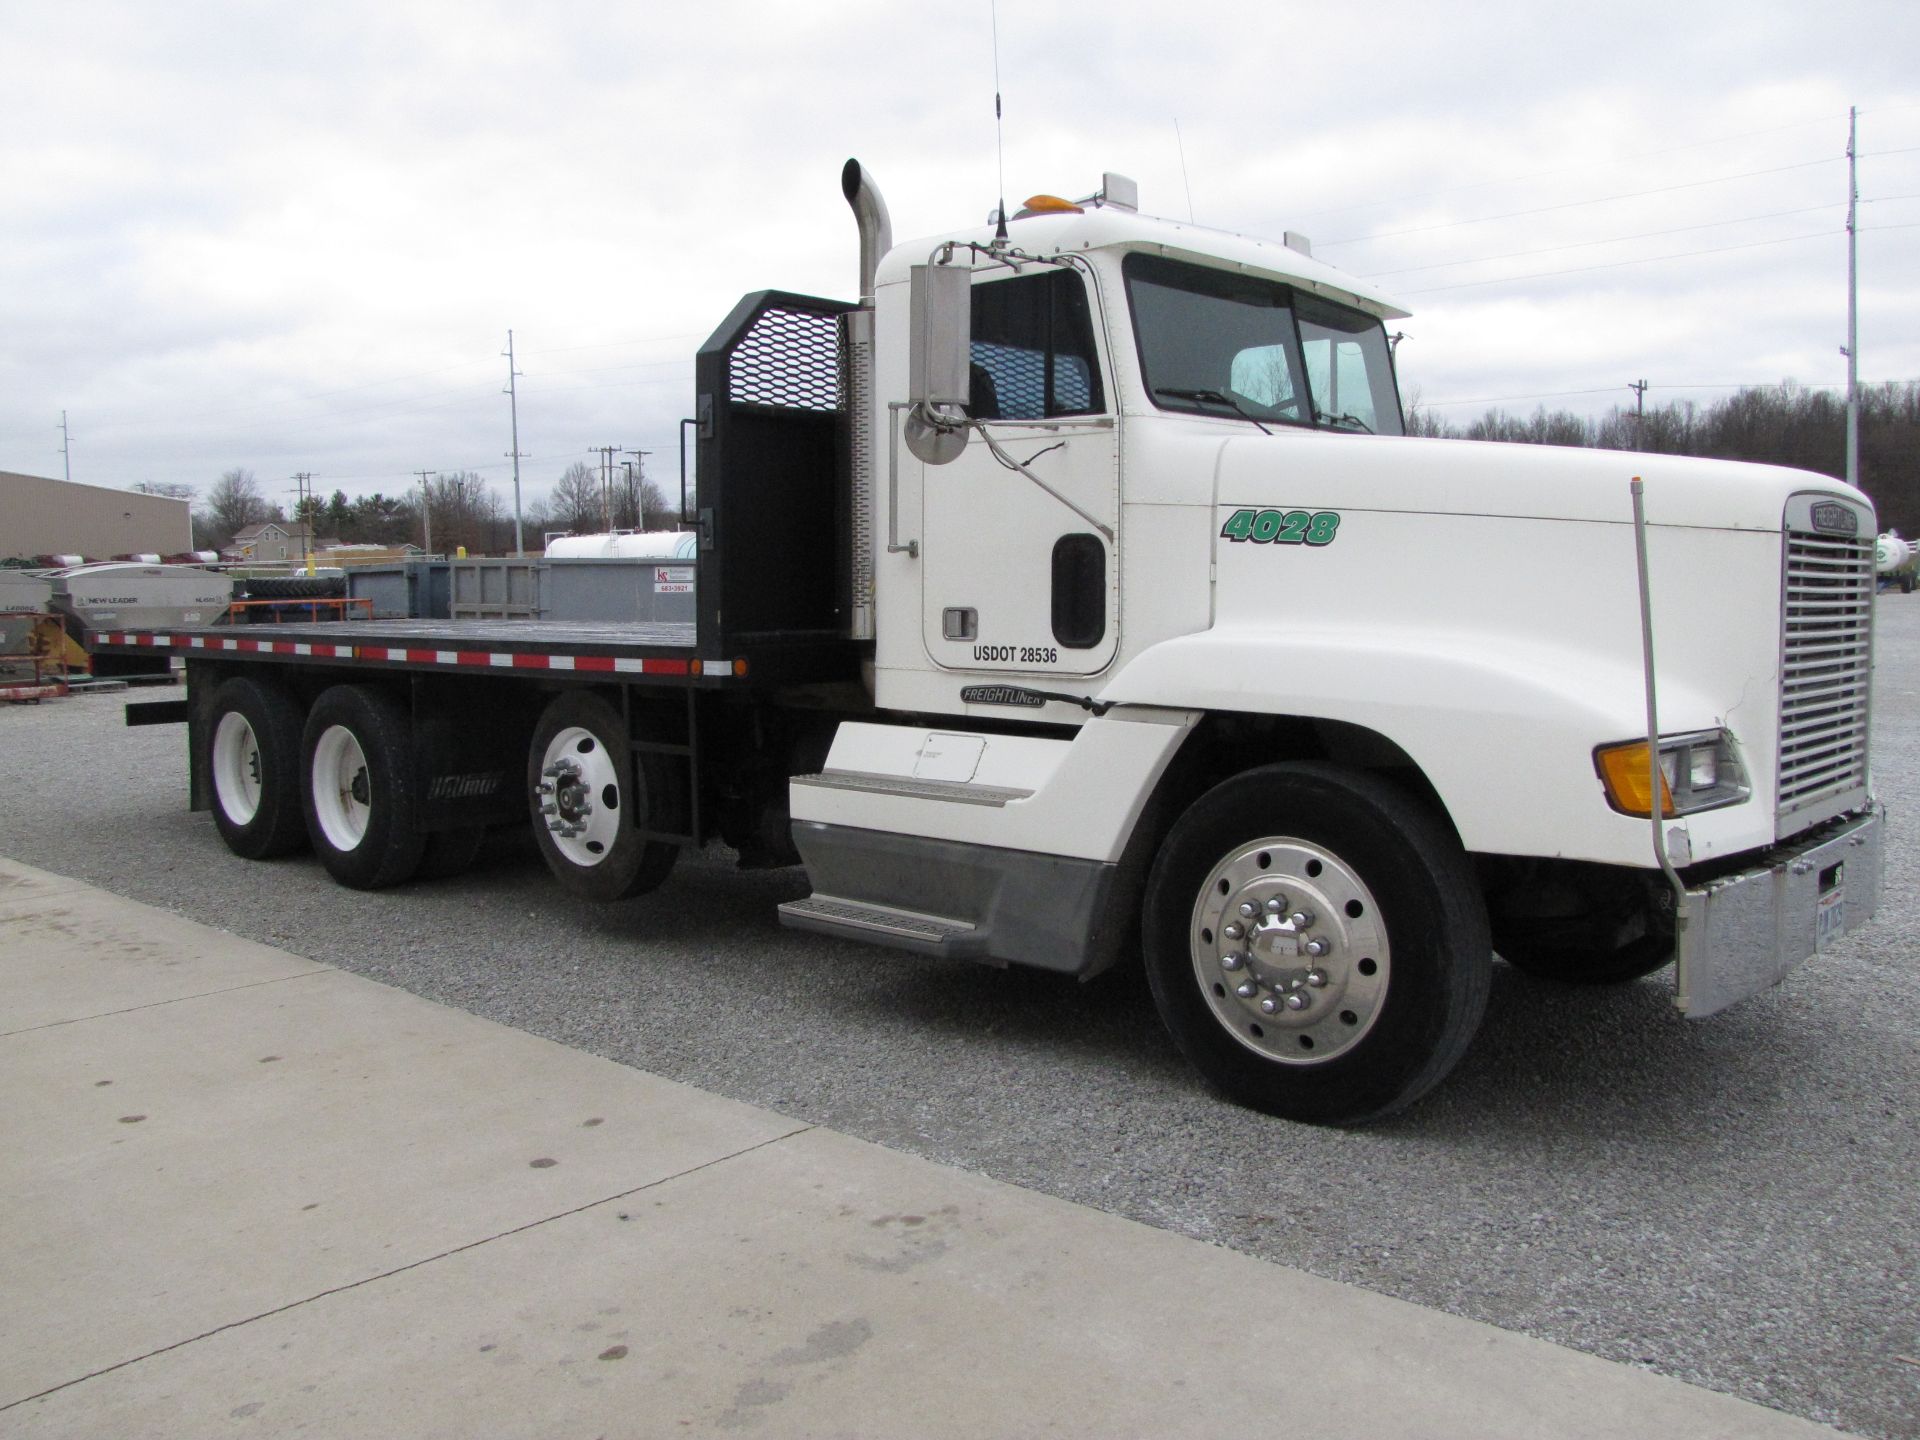 1993 Freightliner FLD120 semi truck - Image 12 of 71